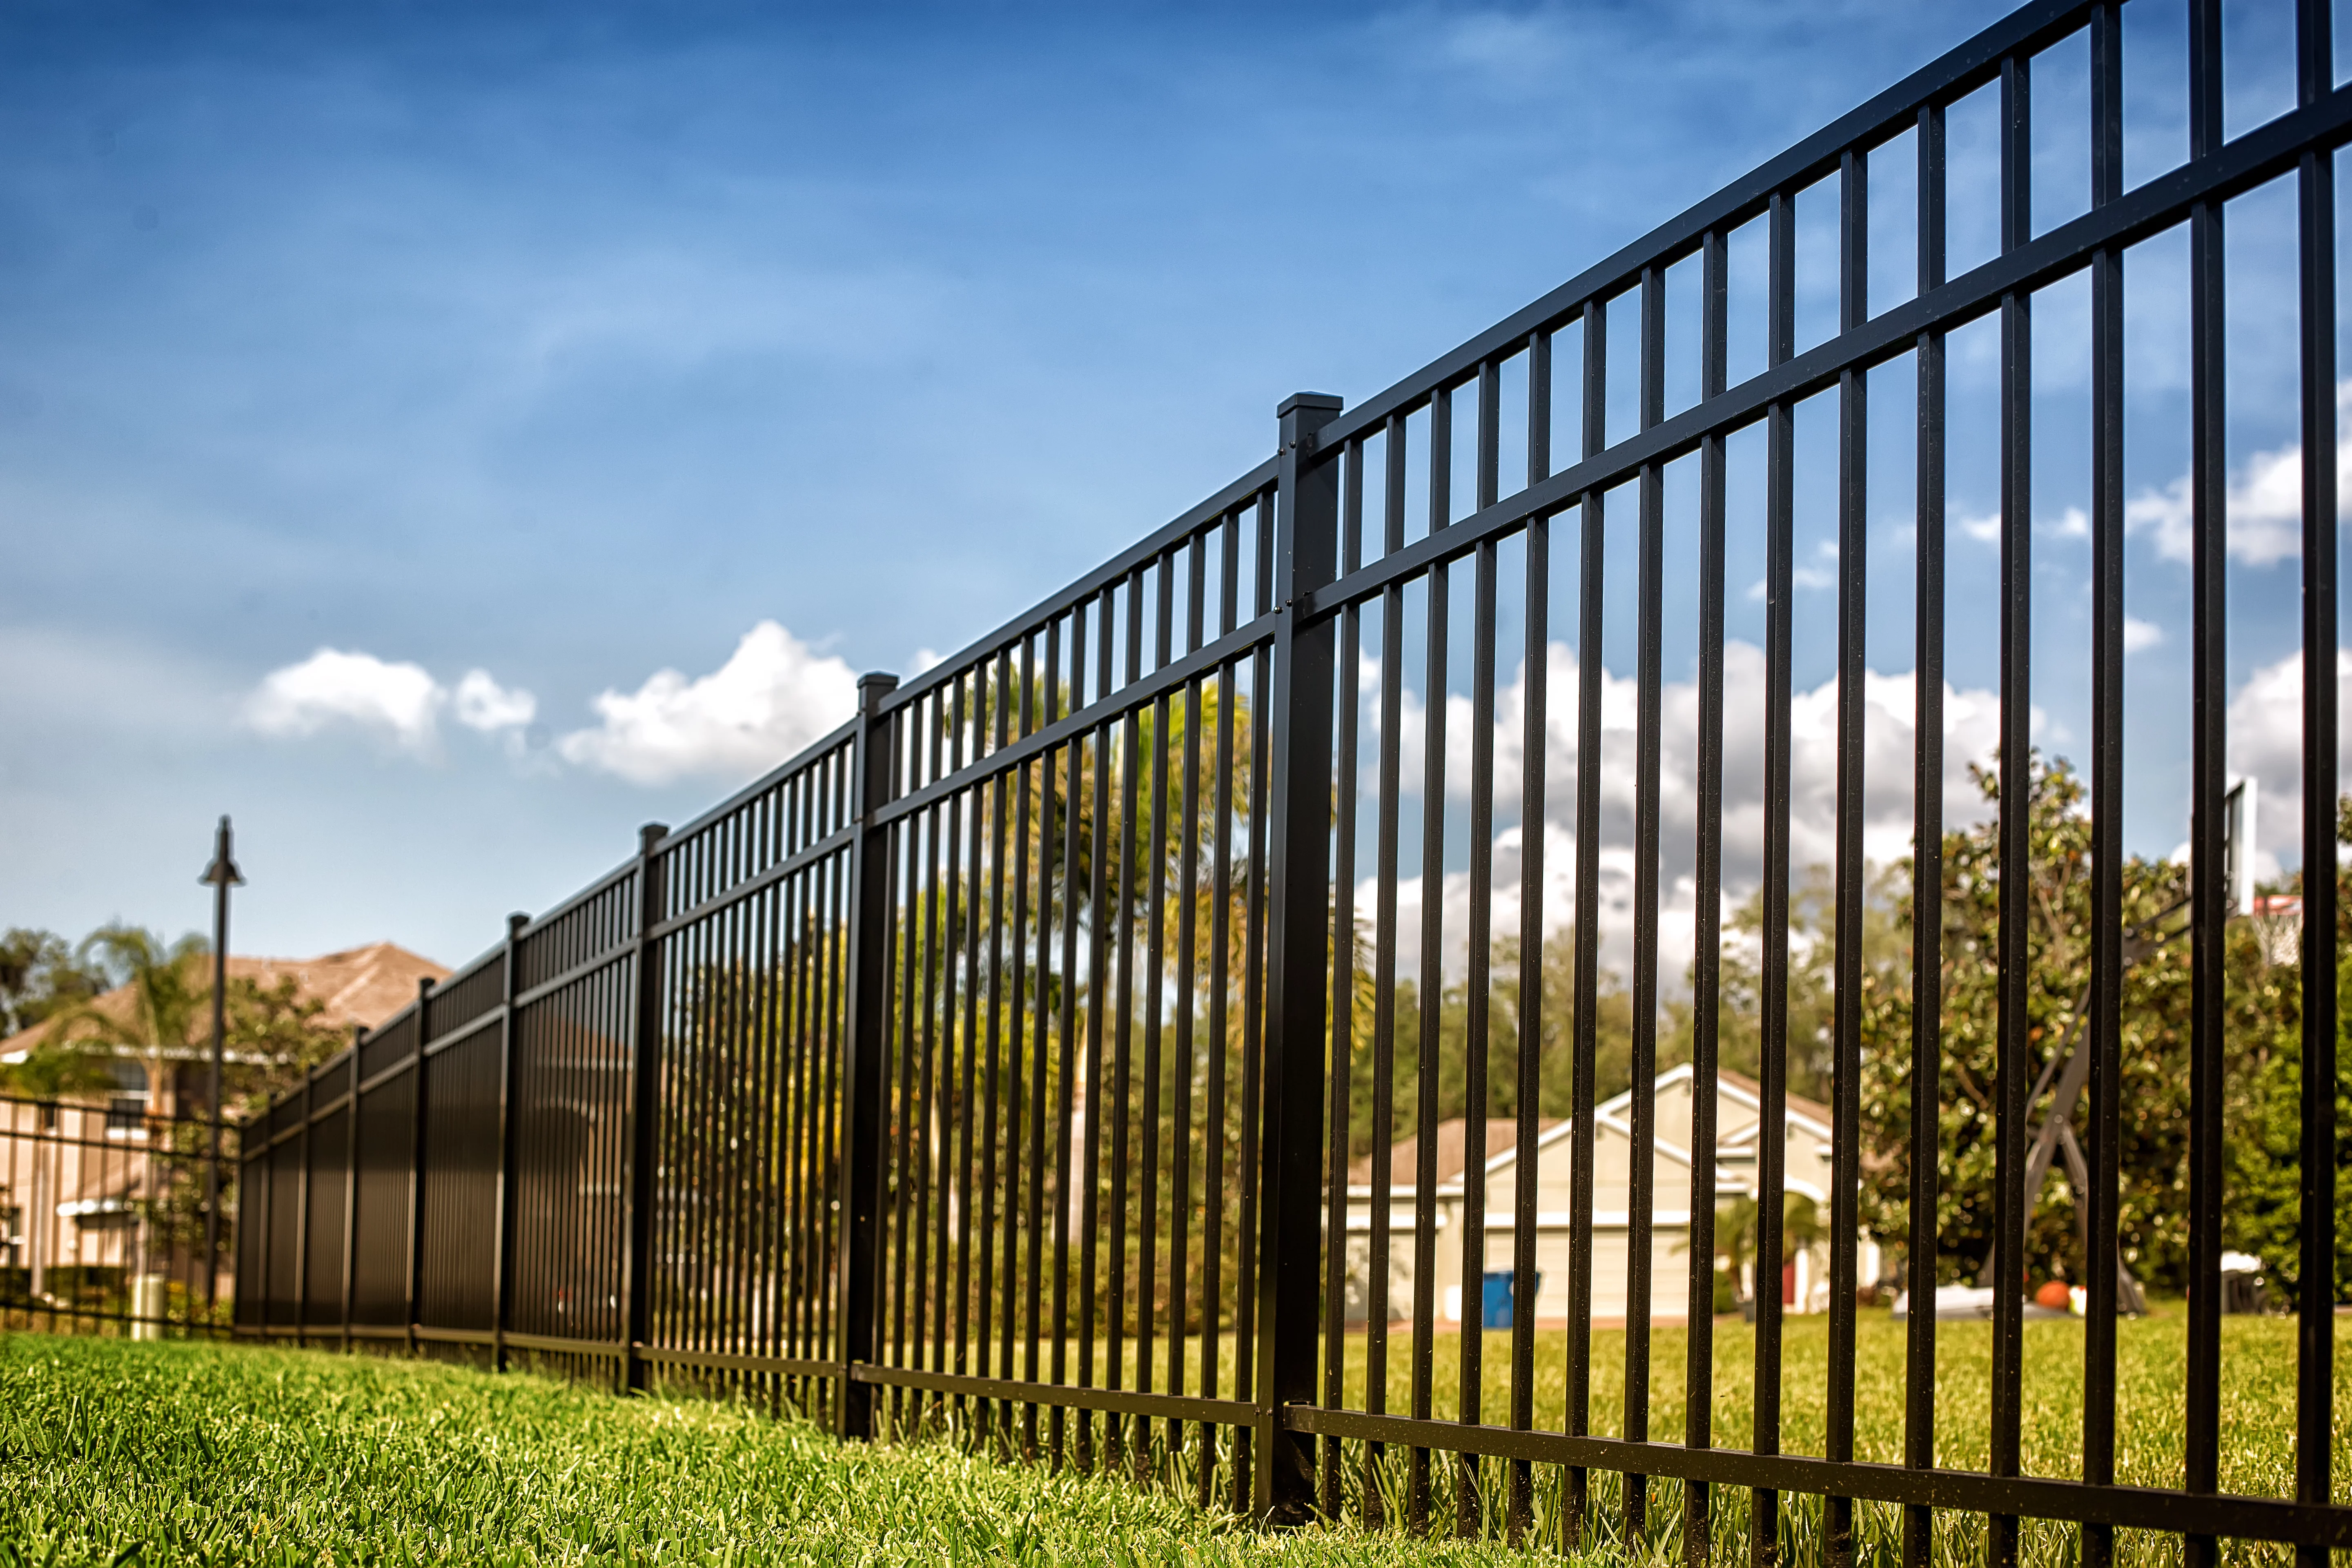 How do I discover who owns a boundary fence, wall or hedge?